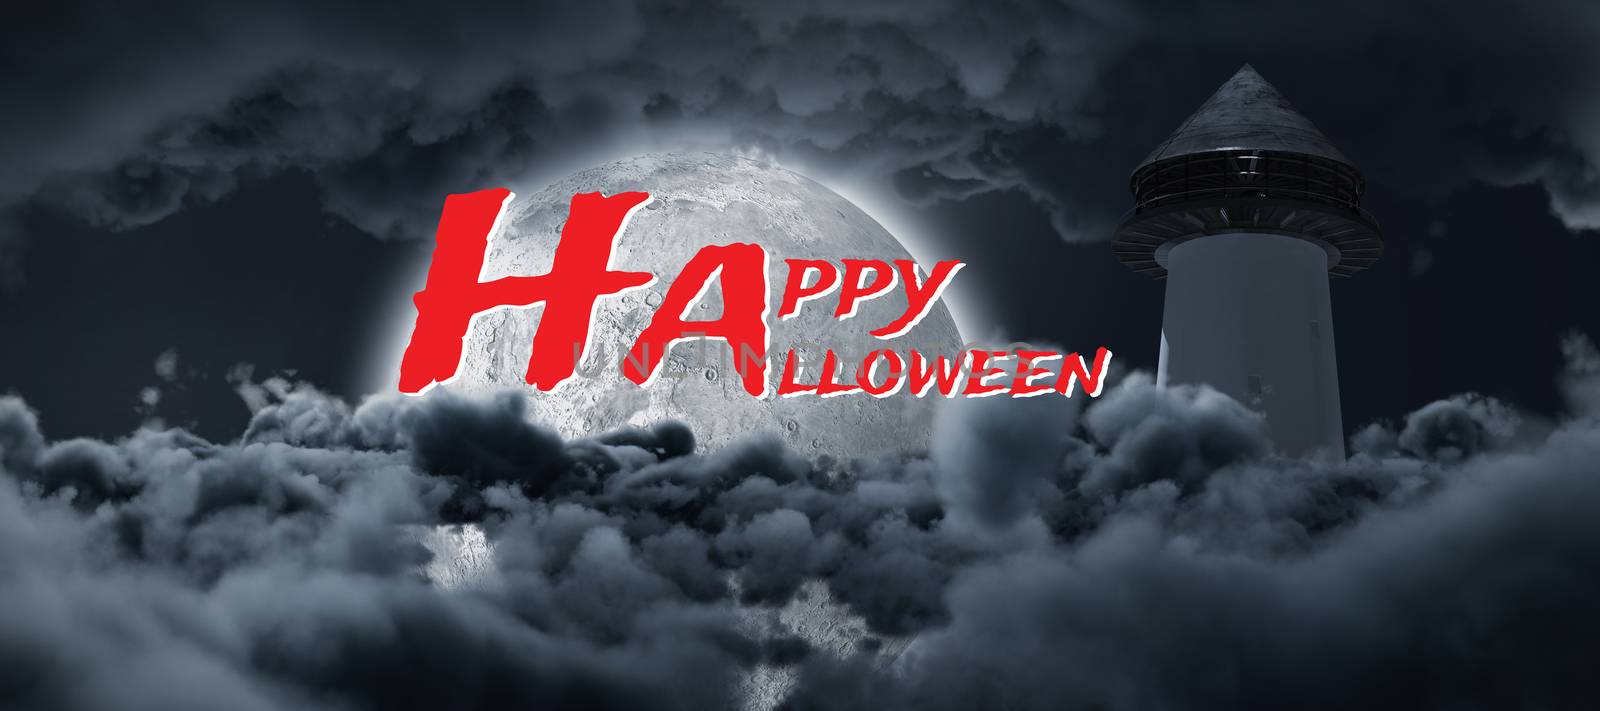 Graphic image of Happy Halloween text against half moon shining between clouds and structure